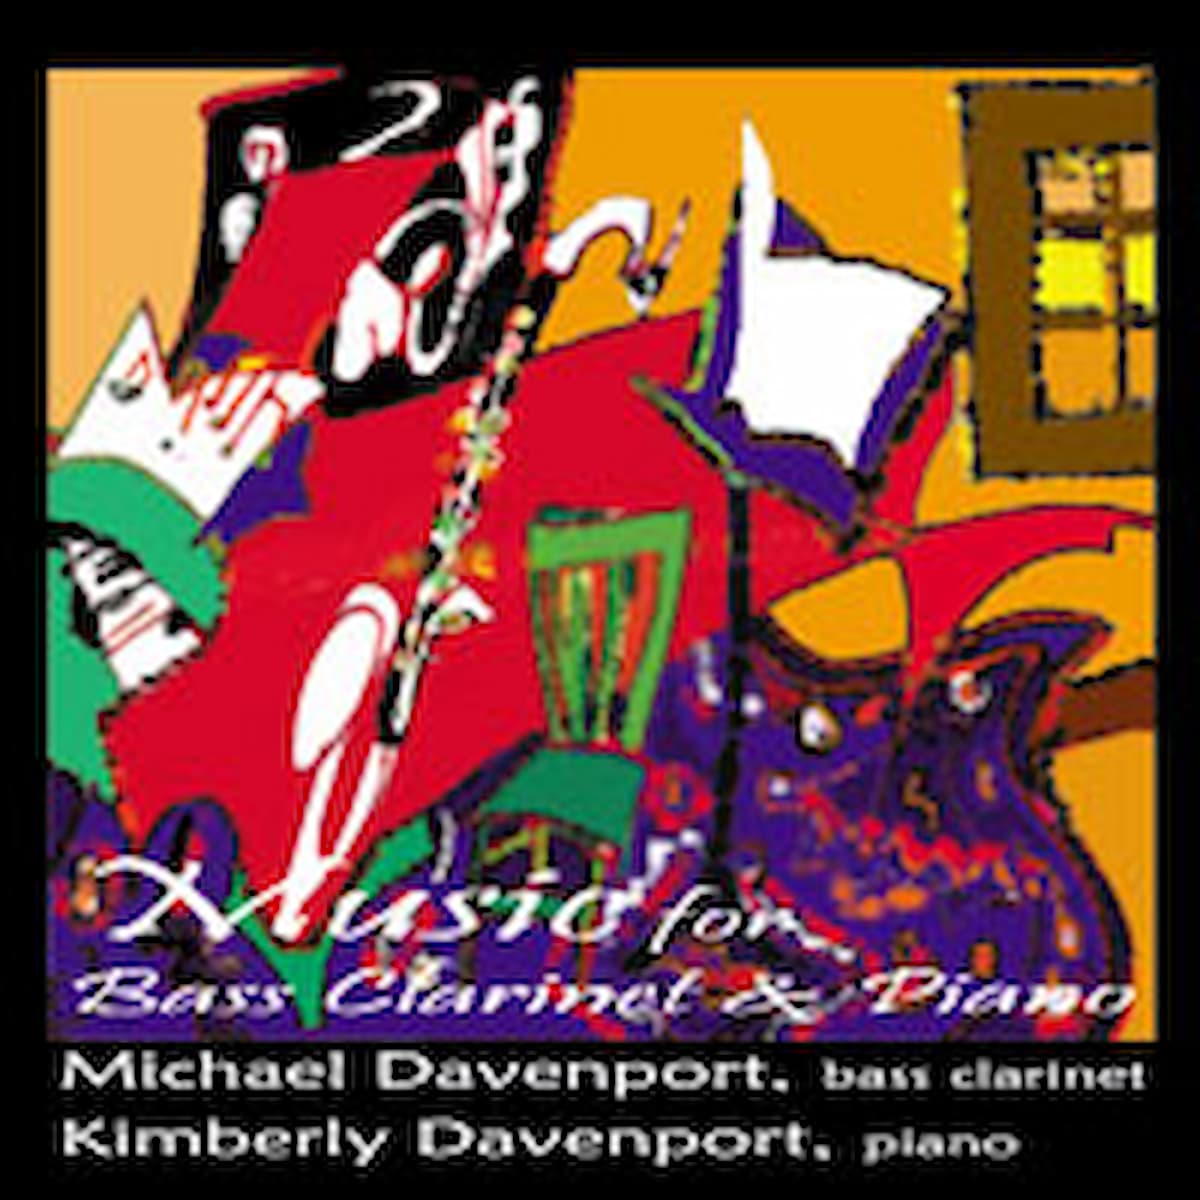 Record cover artwork for Music for Bass Clarinet & Piano